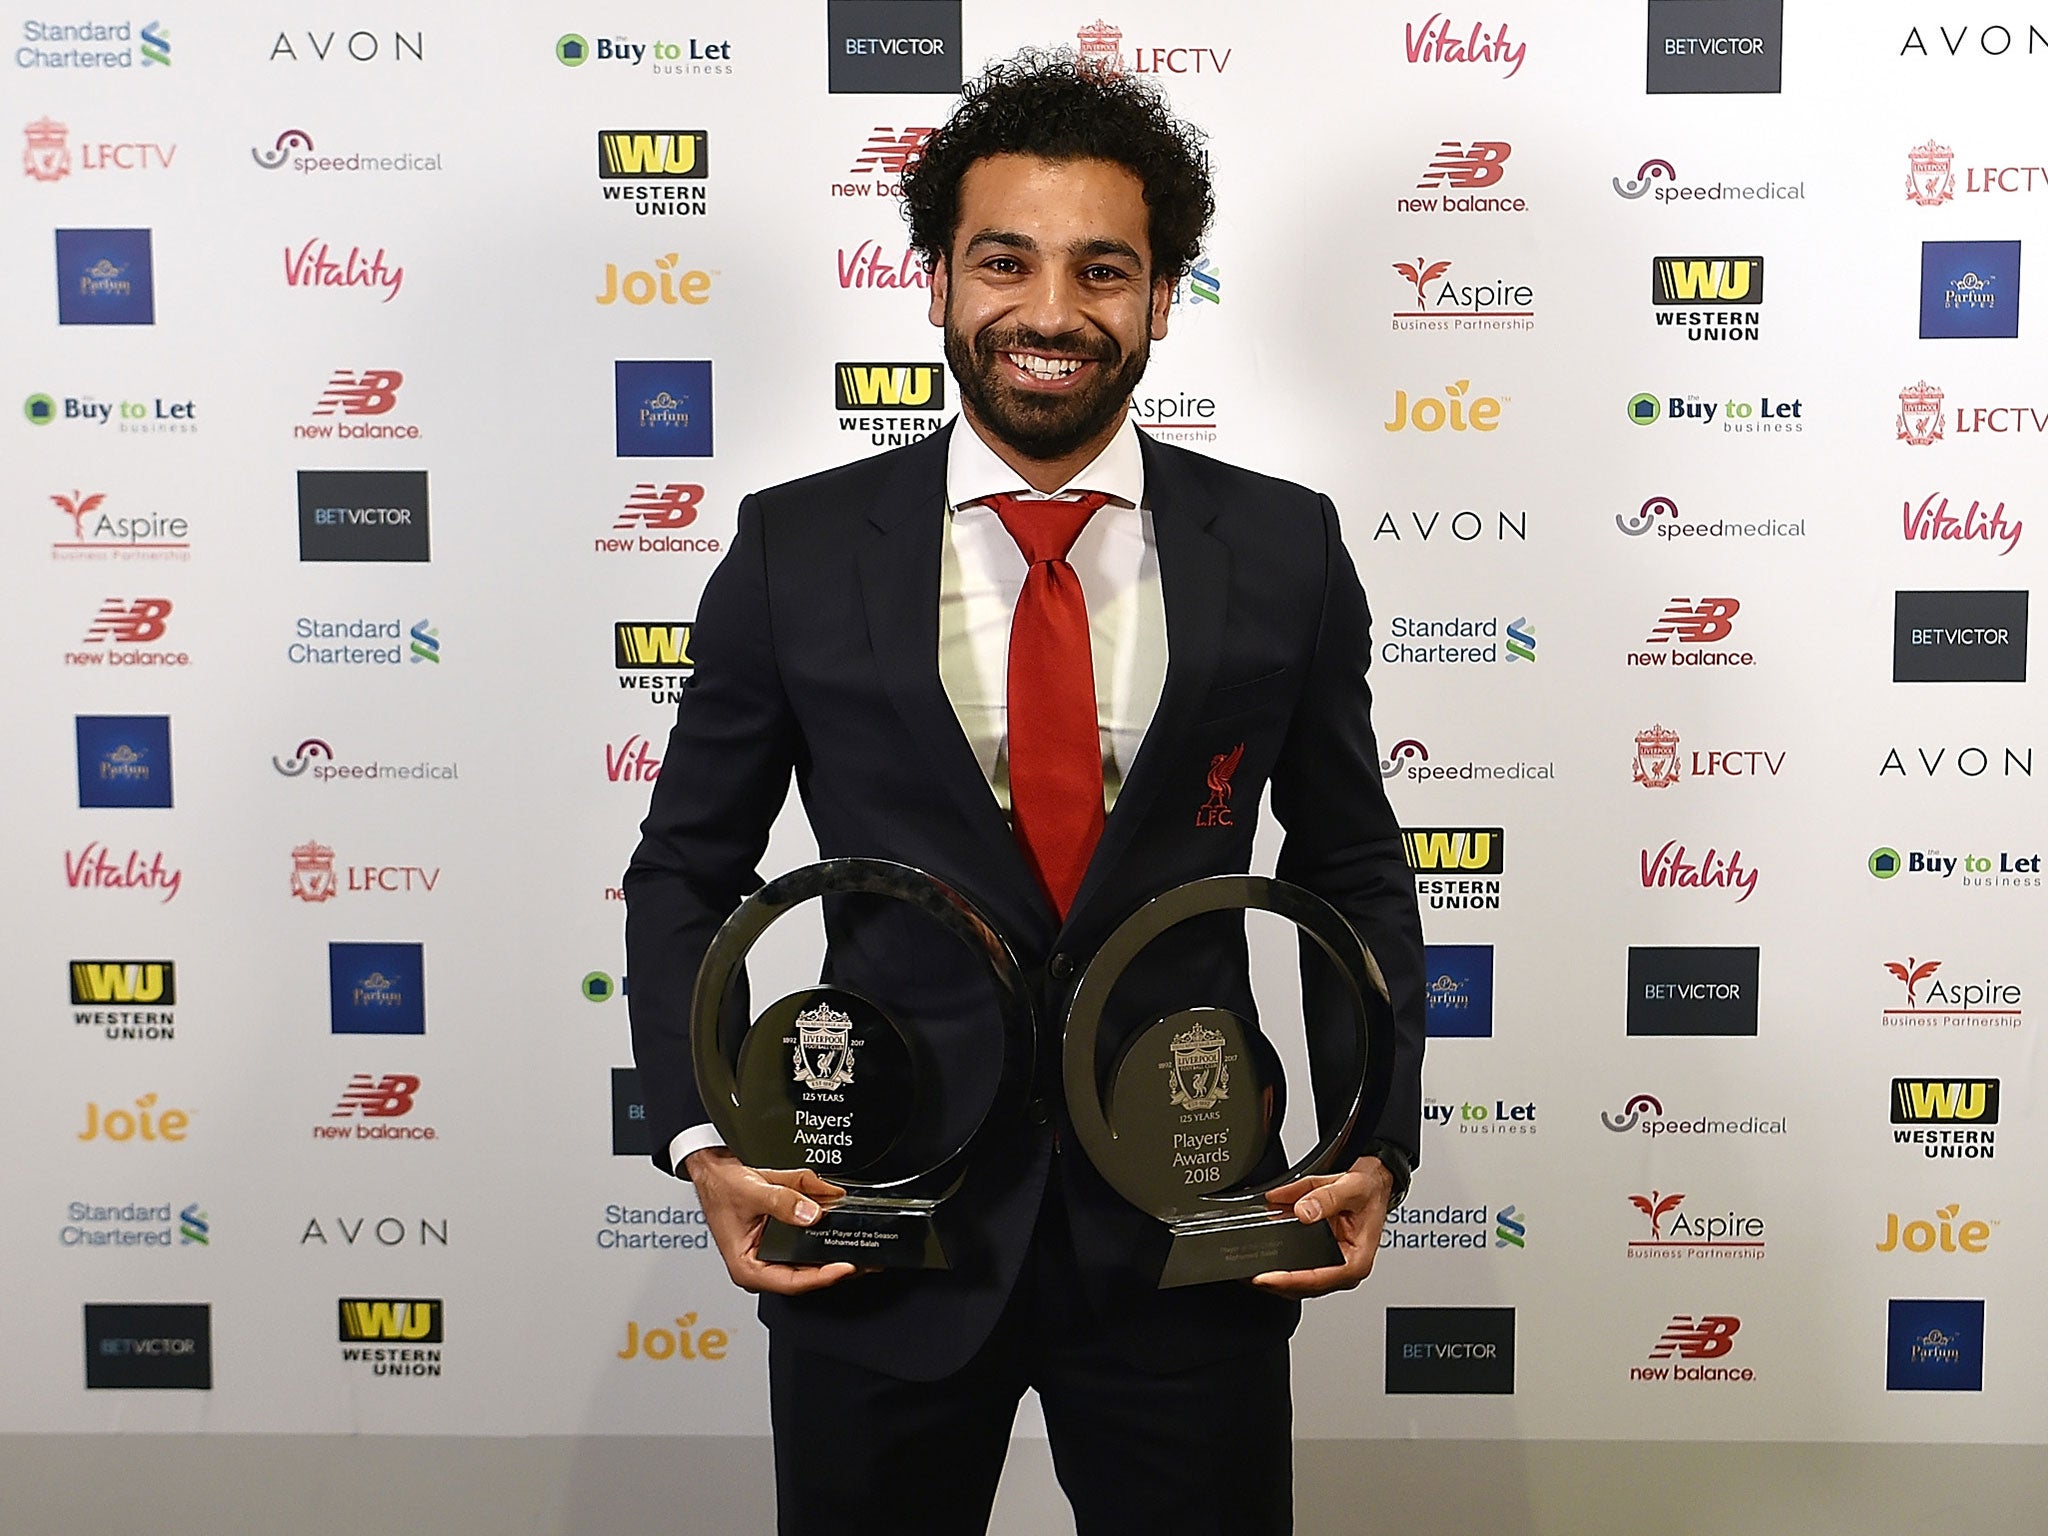 Salah picked up two gongs at Liverpool's end of season awards